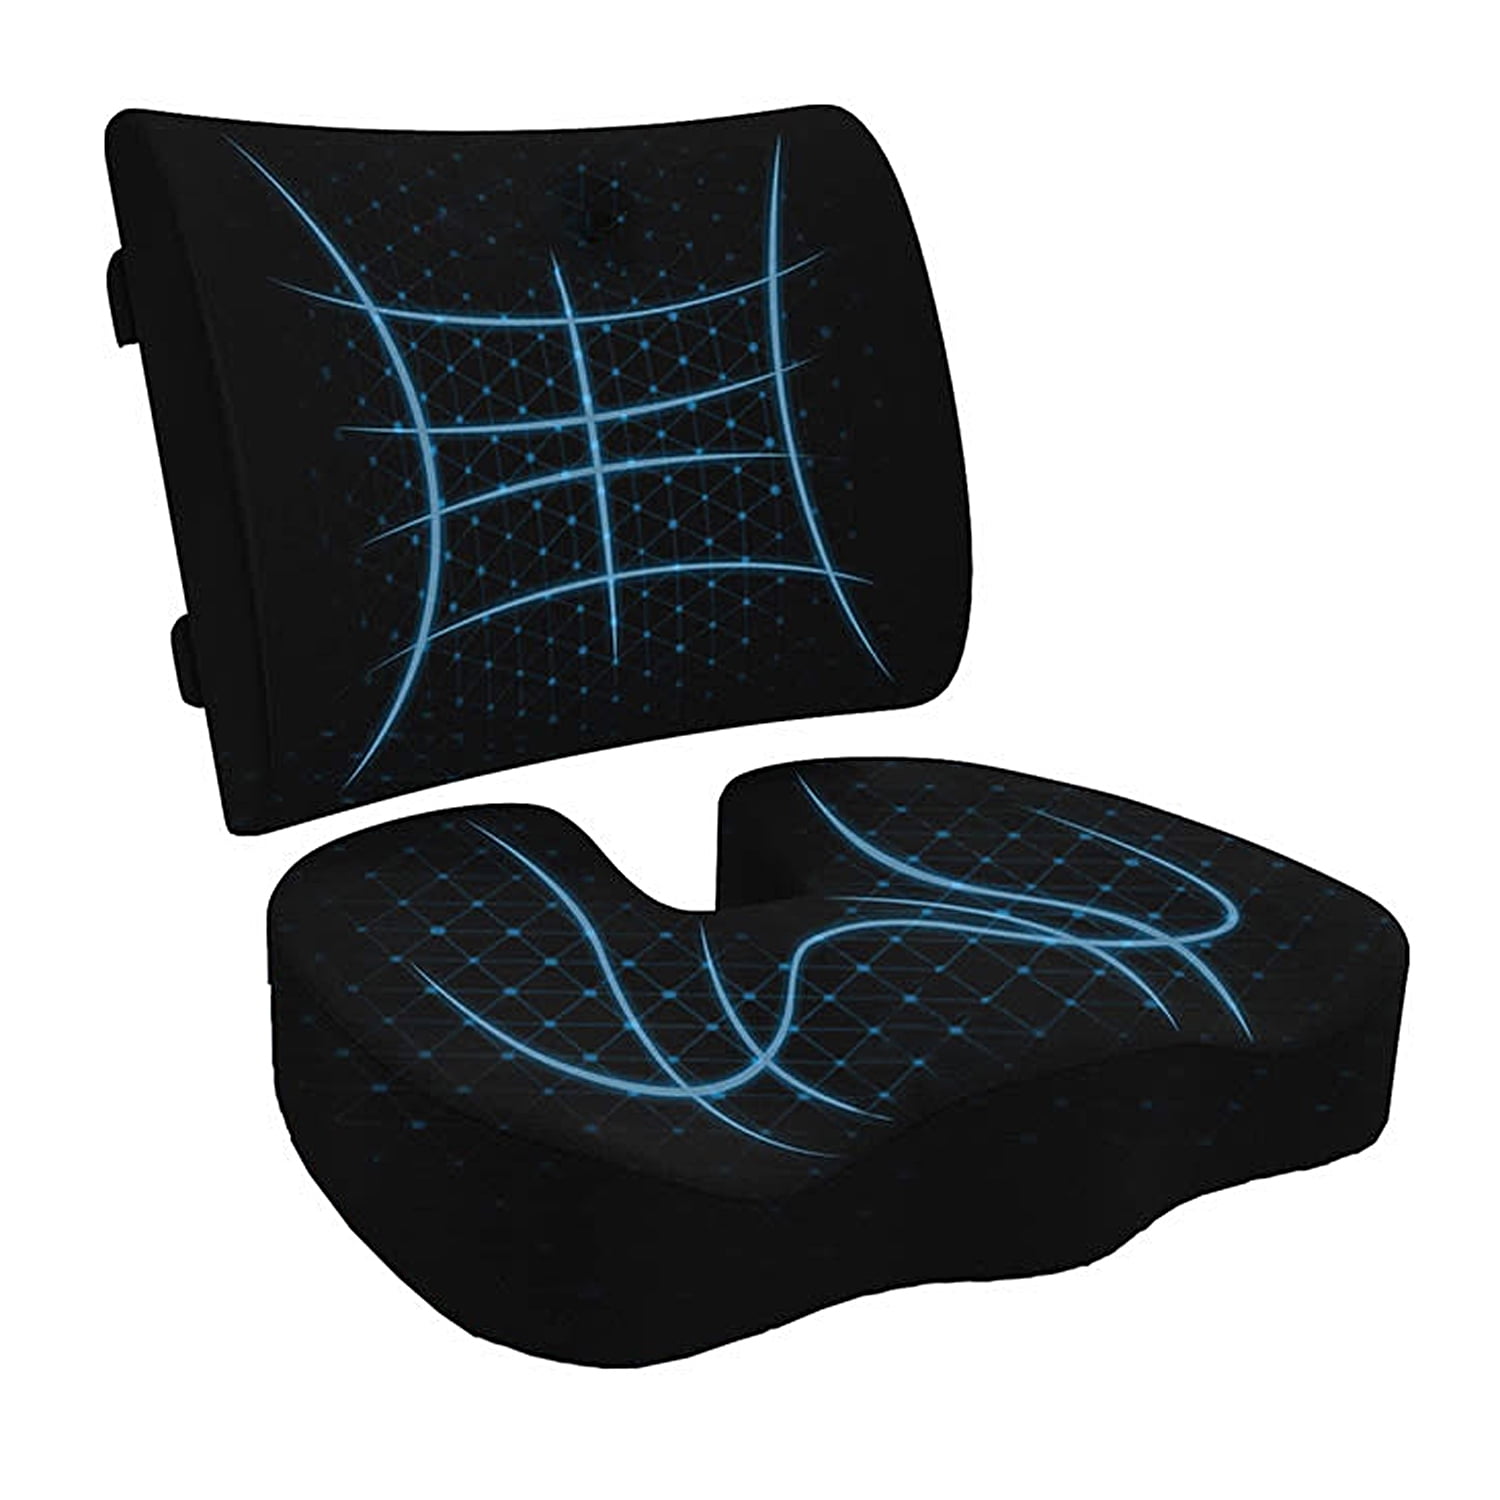 Padded Seat Cushion Fits the Dolomite Legacy, Futura, Symphony and Alpha